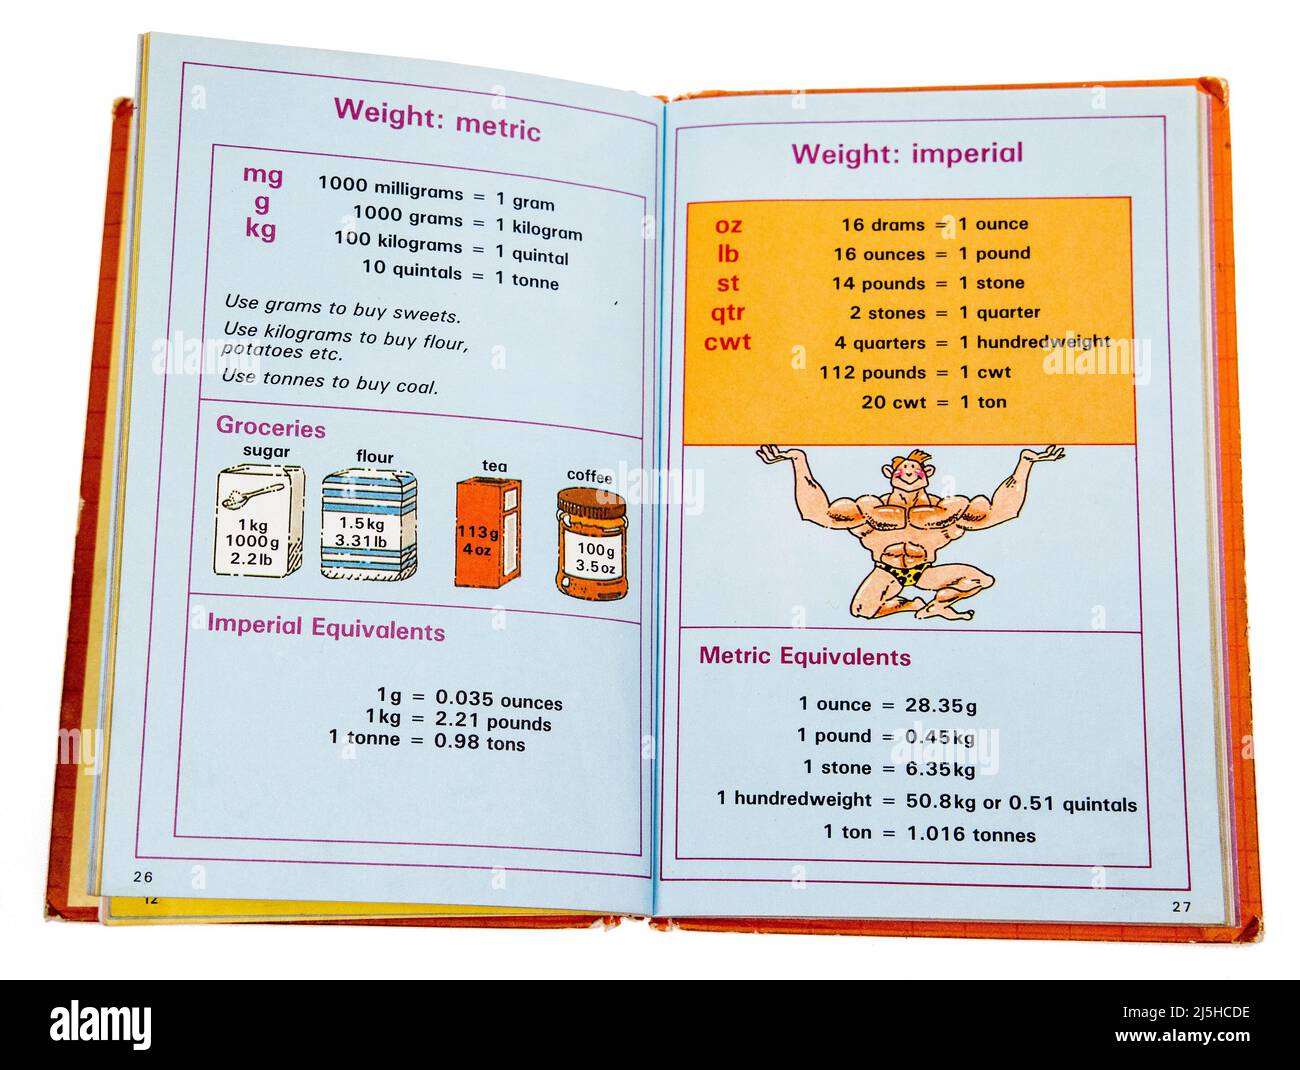 The Ladybird Book of Tables, arithmetic teaching aid for children with metric and imperial weight measures, UK Stock Photo